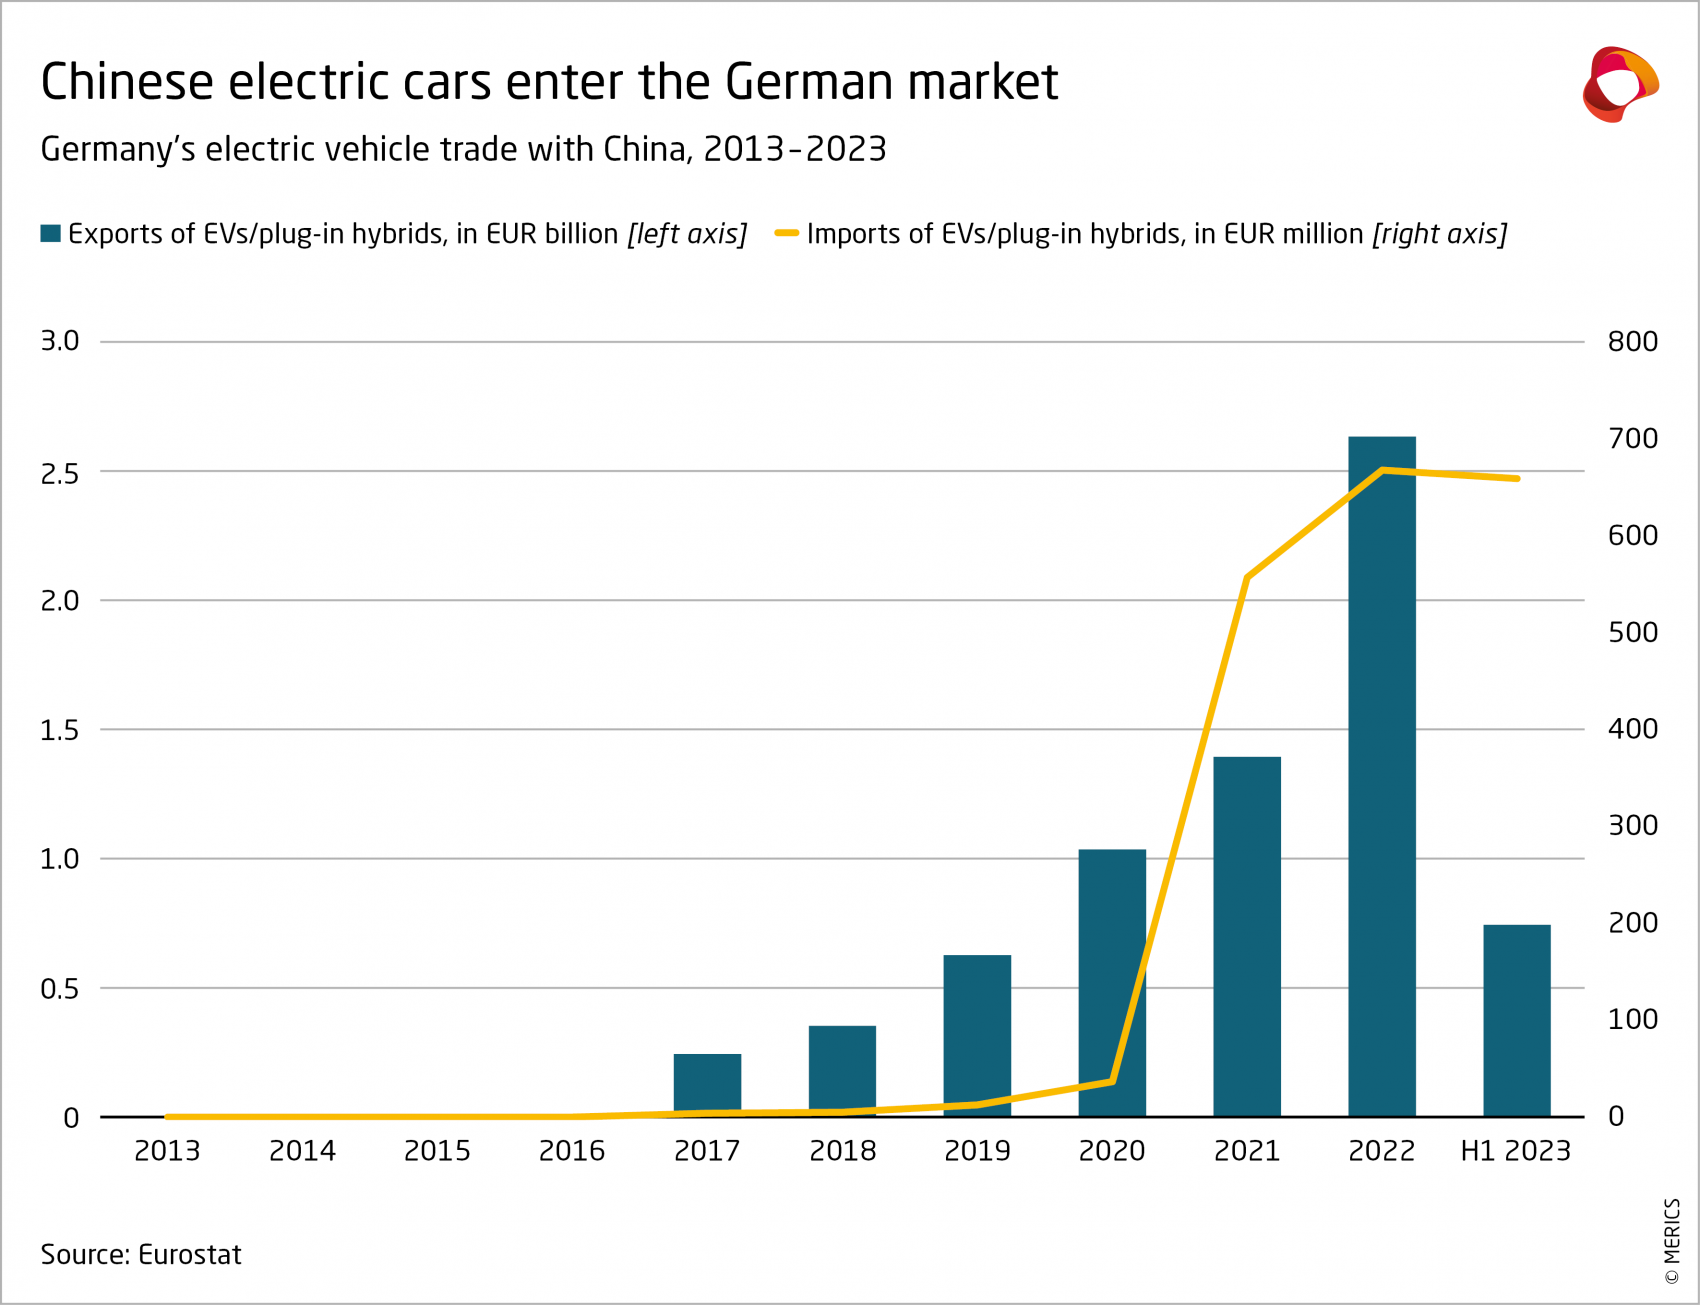 Germany's electric vehicle trade with China, 2013-2023